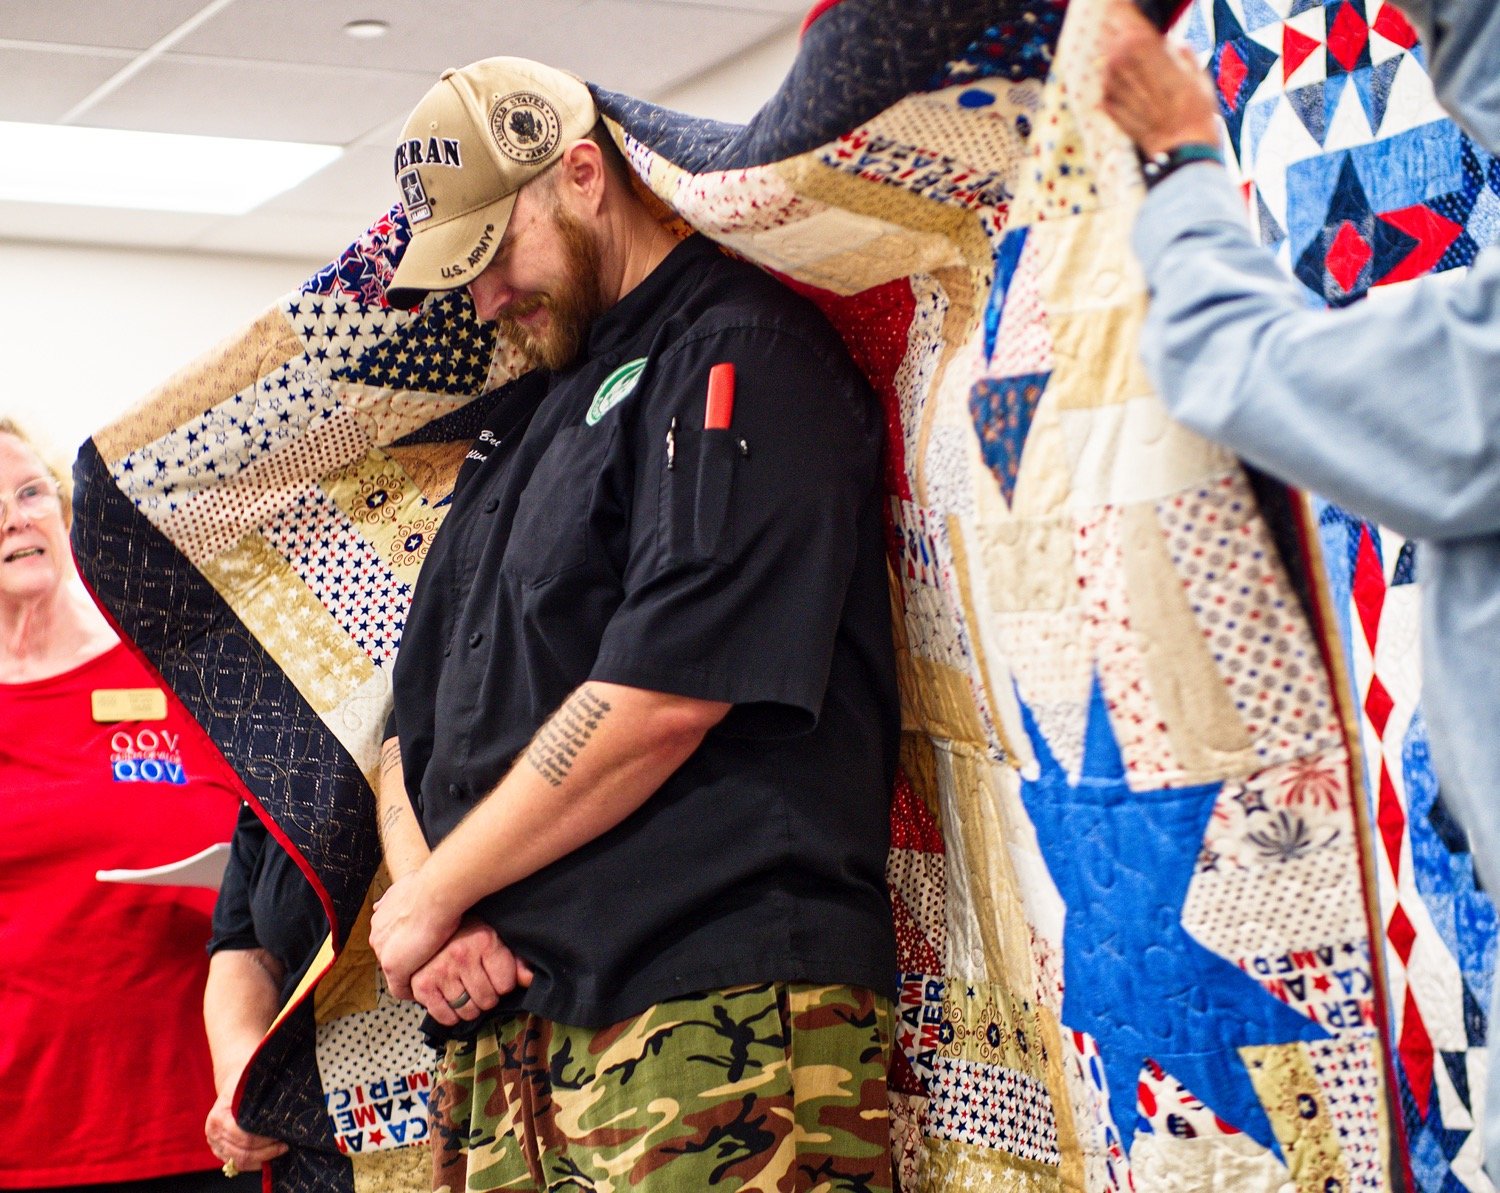 Army veteran Tyler Brown was the first to be wrapped in a quilt made especially for him, as he was also preparing the meal for after the ceremony. He later said, "My mom’s a quilter so I know what goes into these things and it’s appreciated." [view more veteran appreciation]